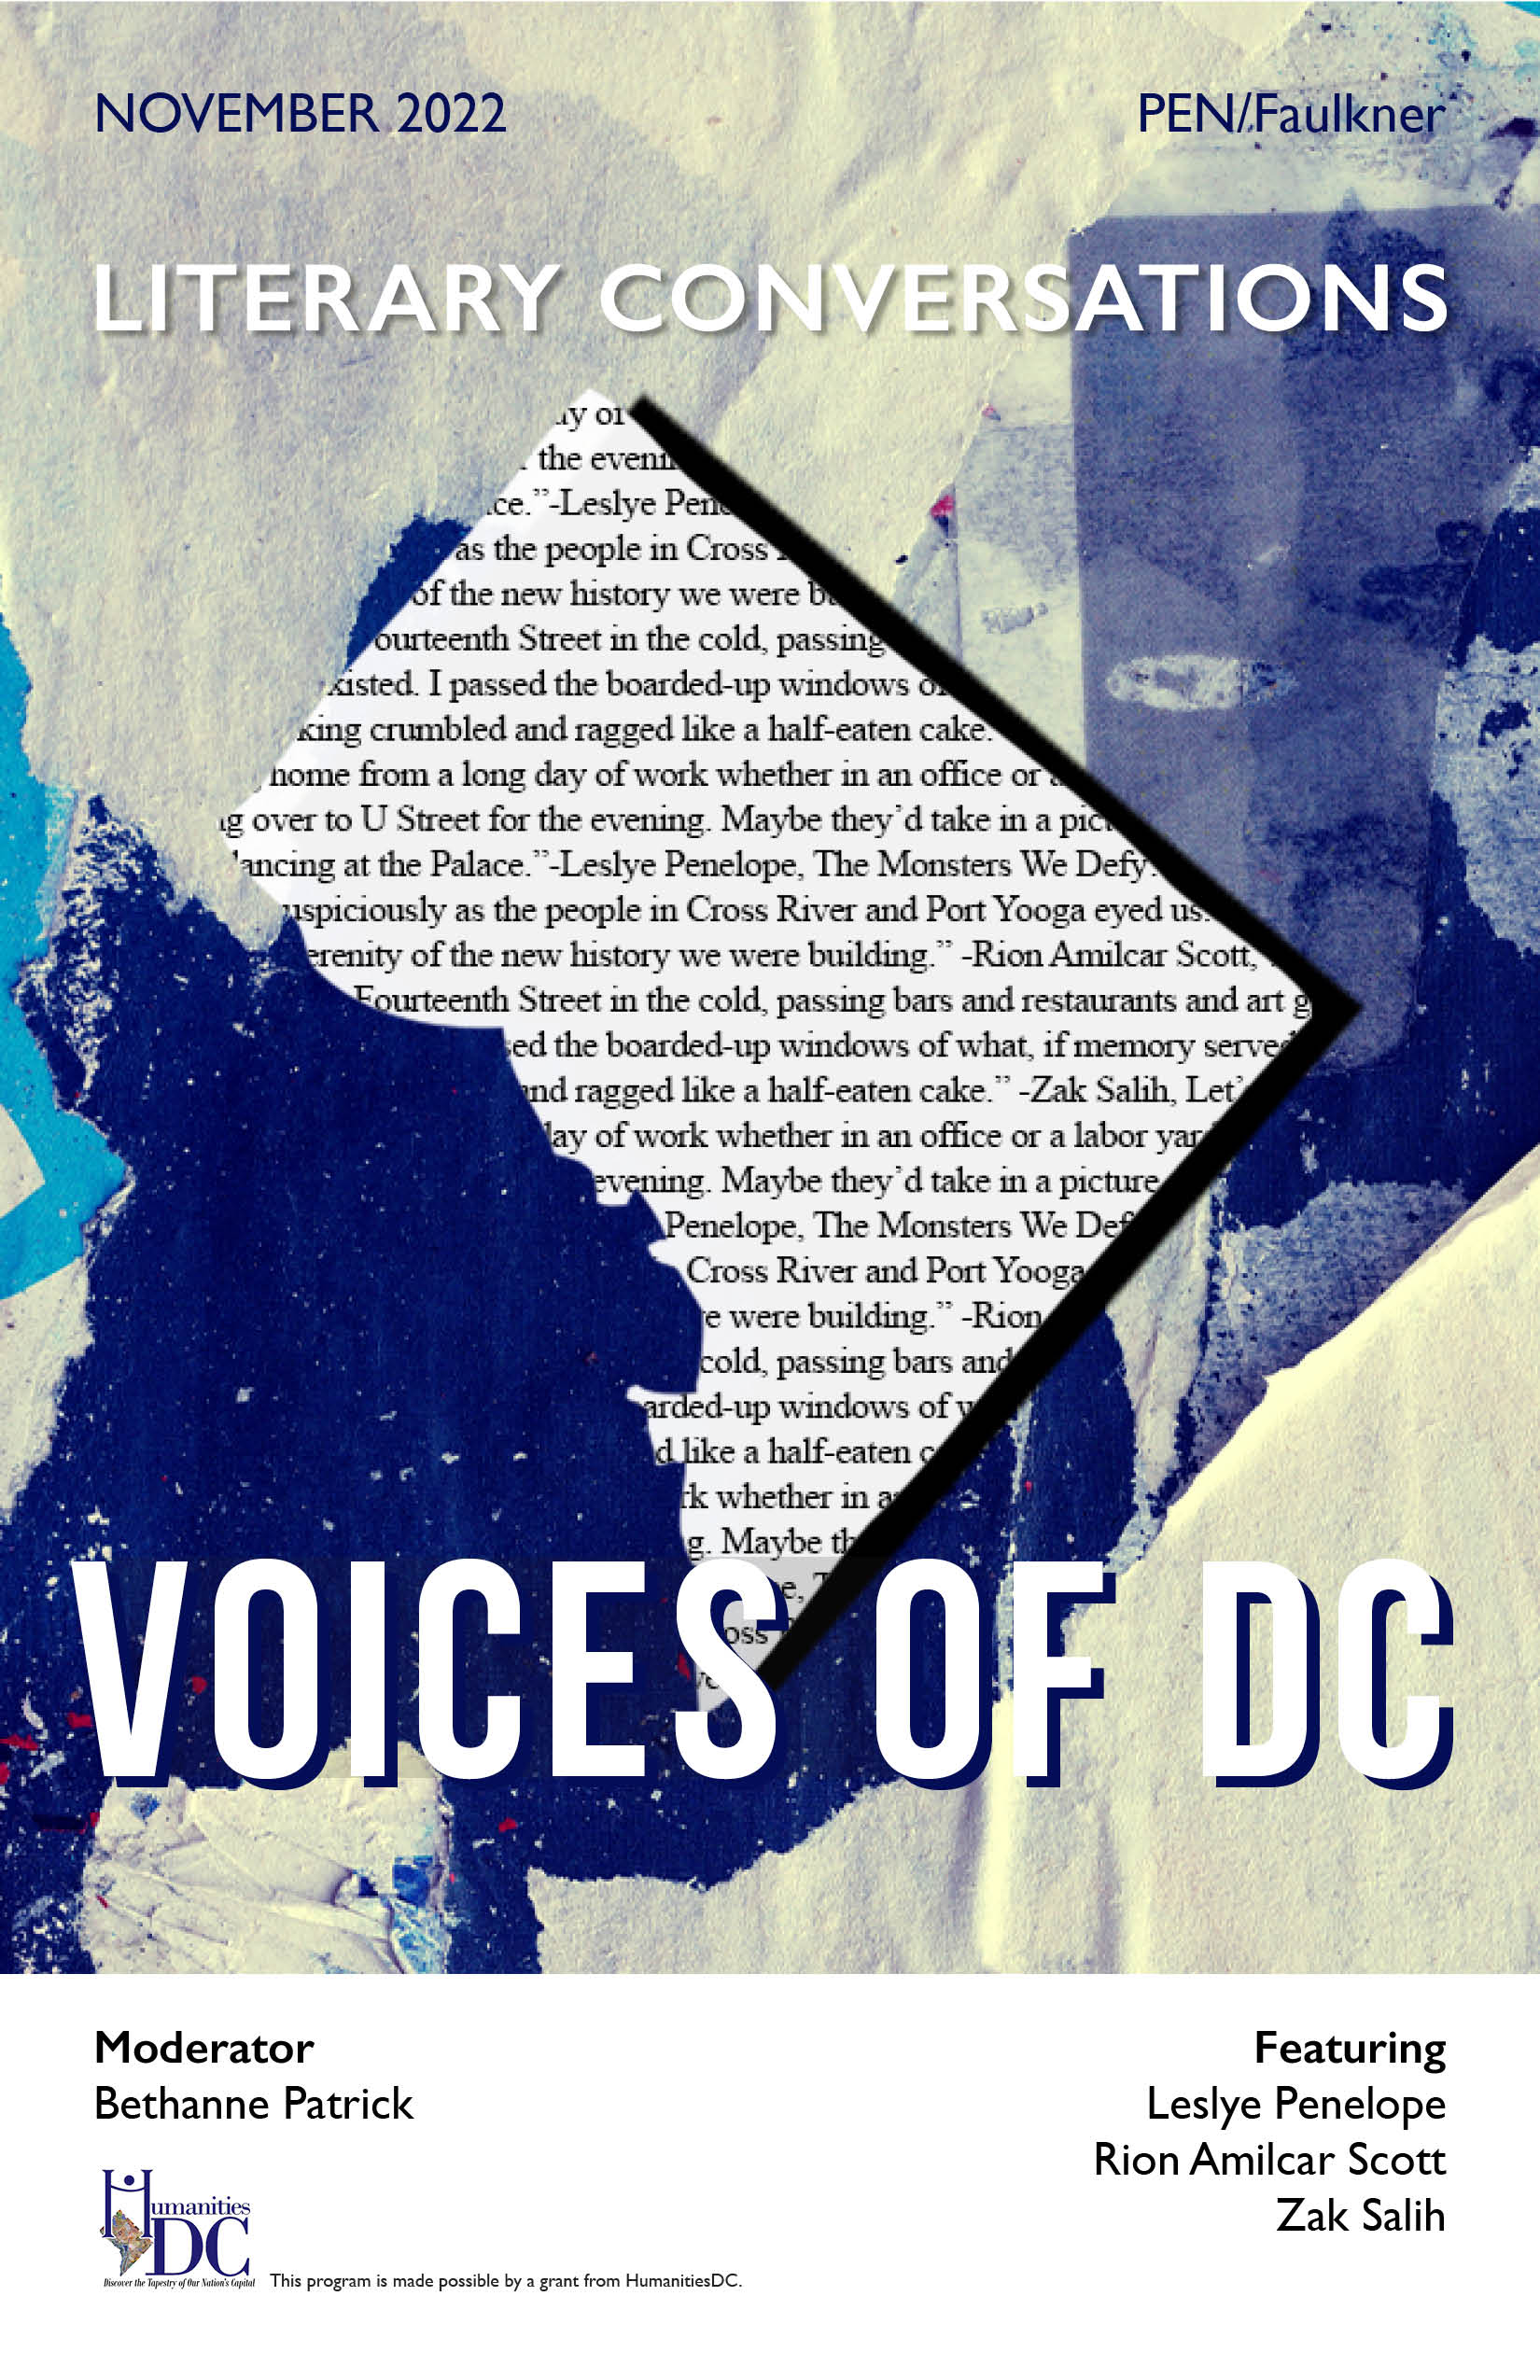 VOICES OF DC